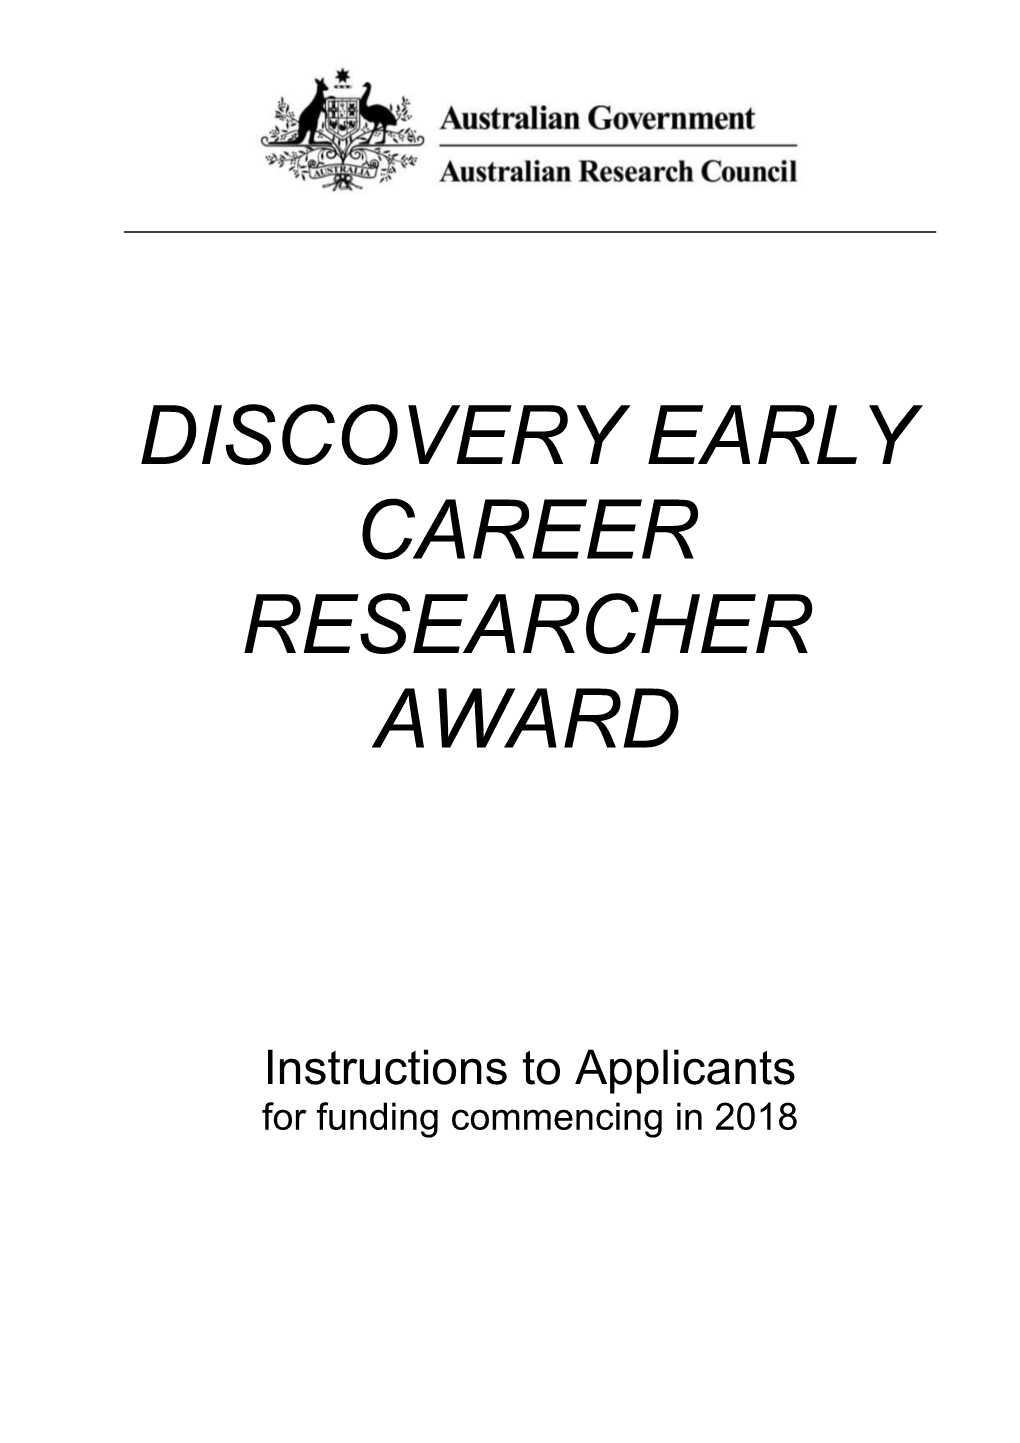 Discovery for Early Career Researcher Award for Funding Commencing in 2018 Instructions